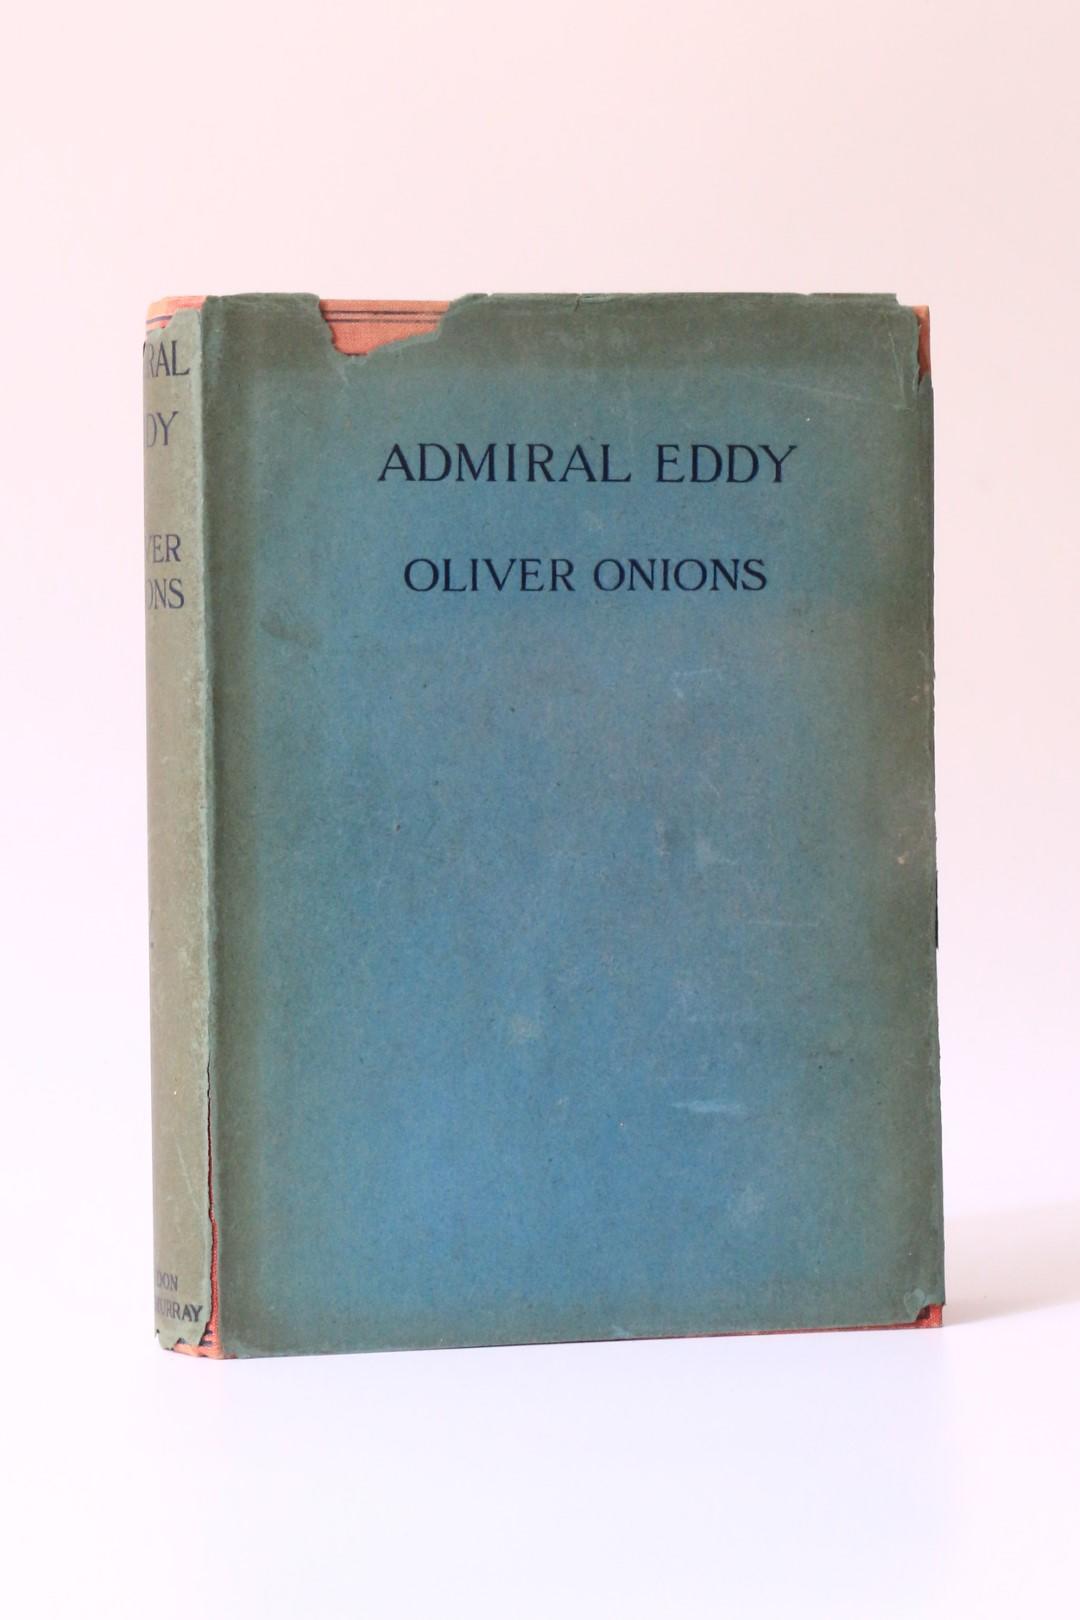 Oliver Onions - Admiral Eddy - John Murray, 1907, First Edition.